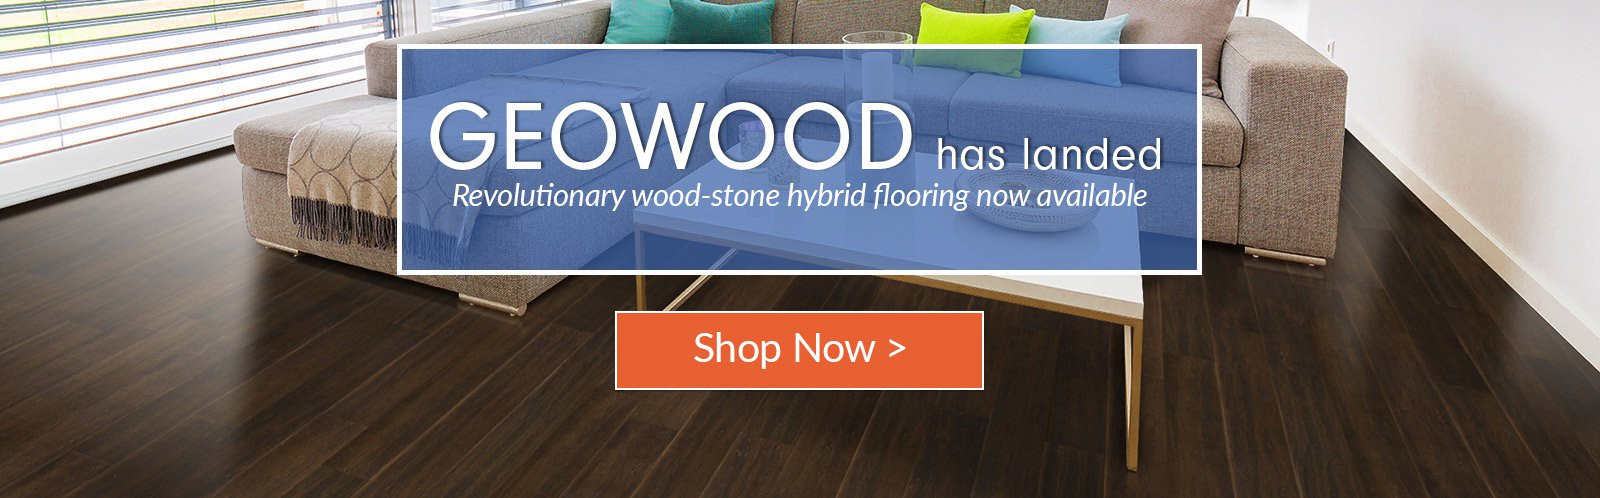 12 Awesome Hardwood Flooring Prices San Antonio 2024 free download hardwood flooring prices san antonio of green building construction materials and home decor cali bamboo with regard to geowood launch homepage slider